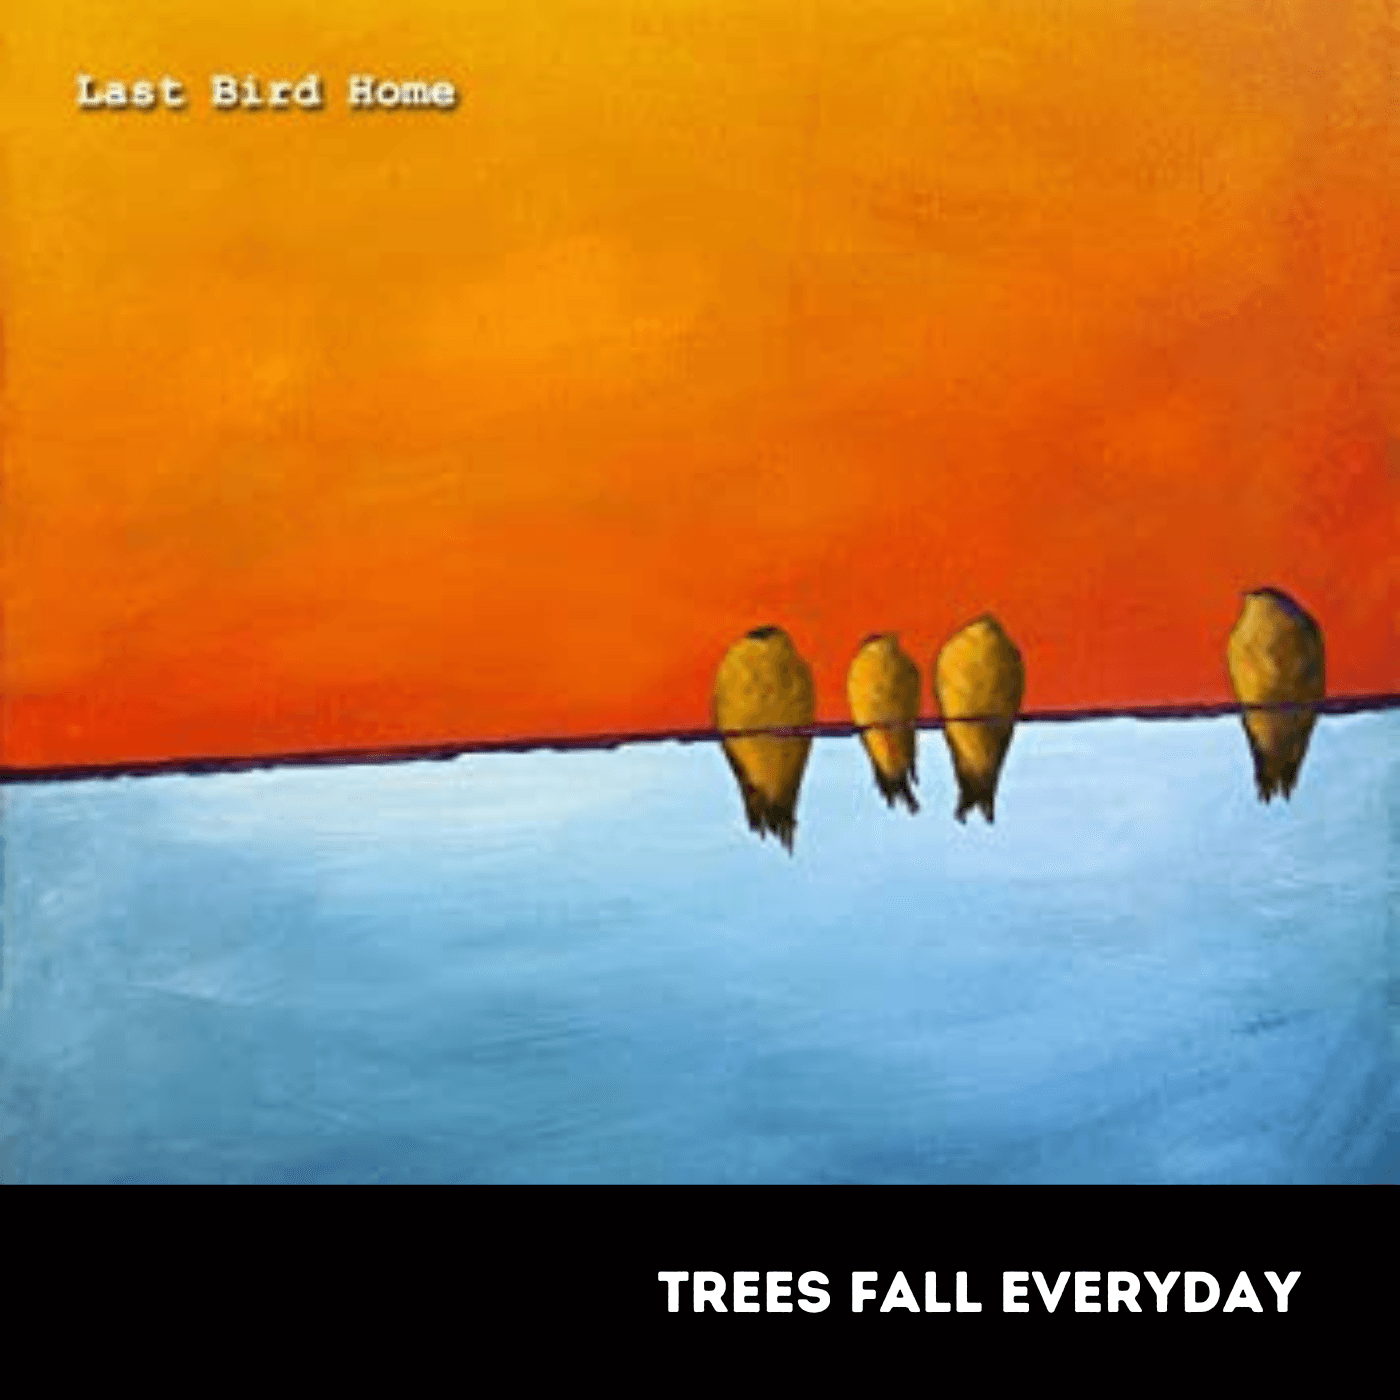 Trees Fall Everyday (Last Bird Home) featuring Tommy Ramone